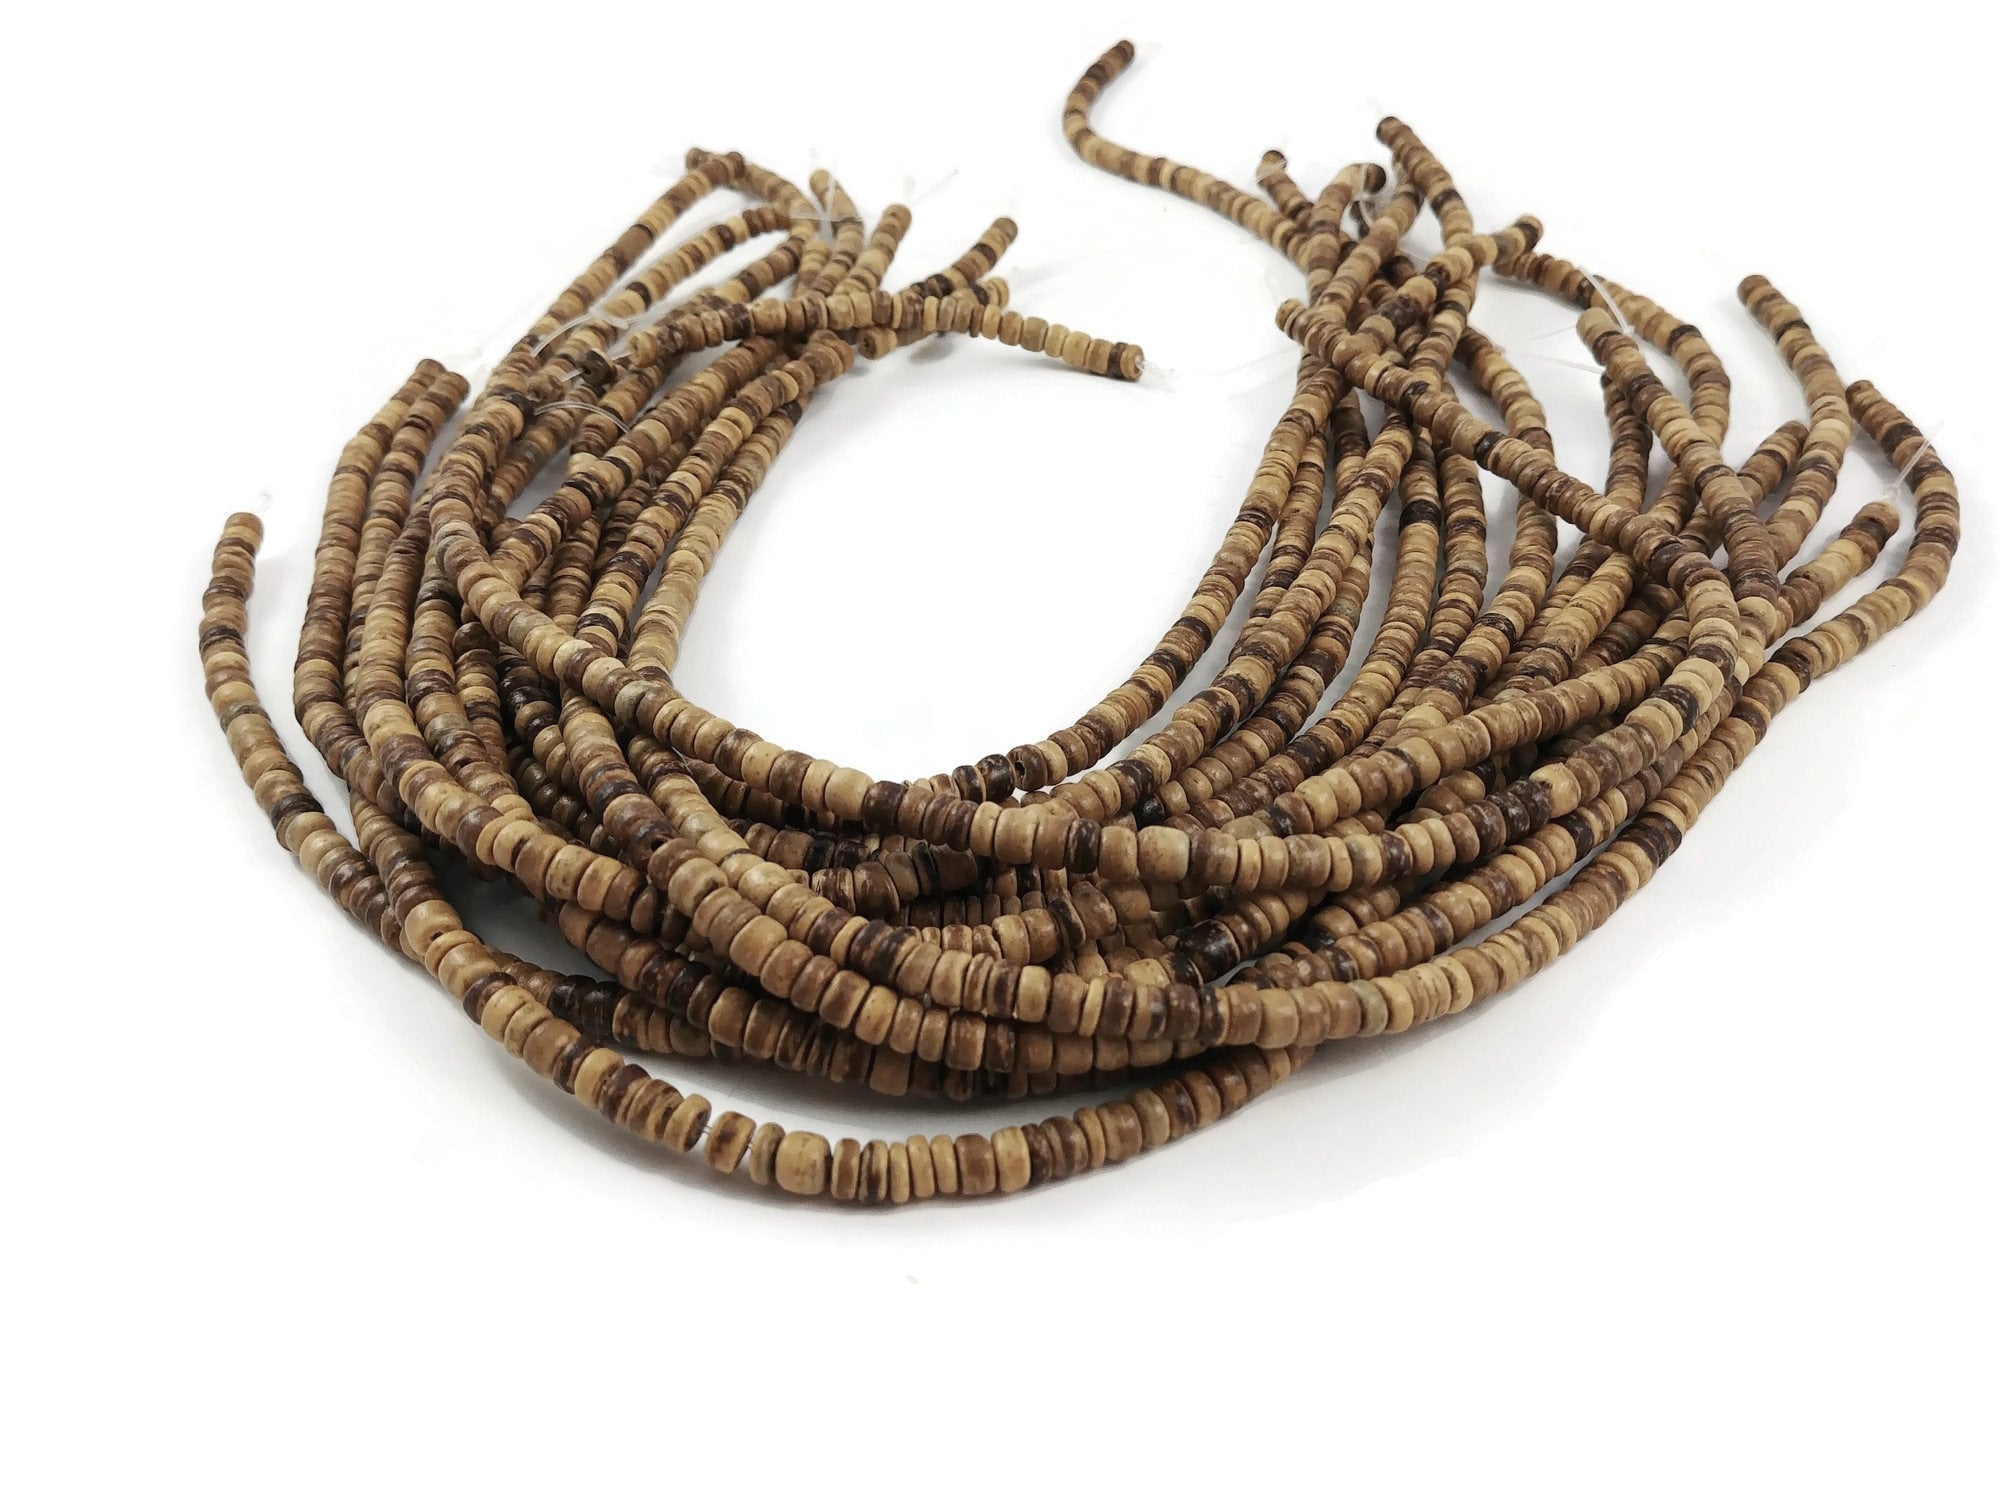 125 natural coconut beads - Coconut Rondelle Disk Beads 5mm 